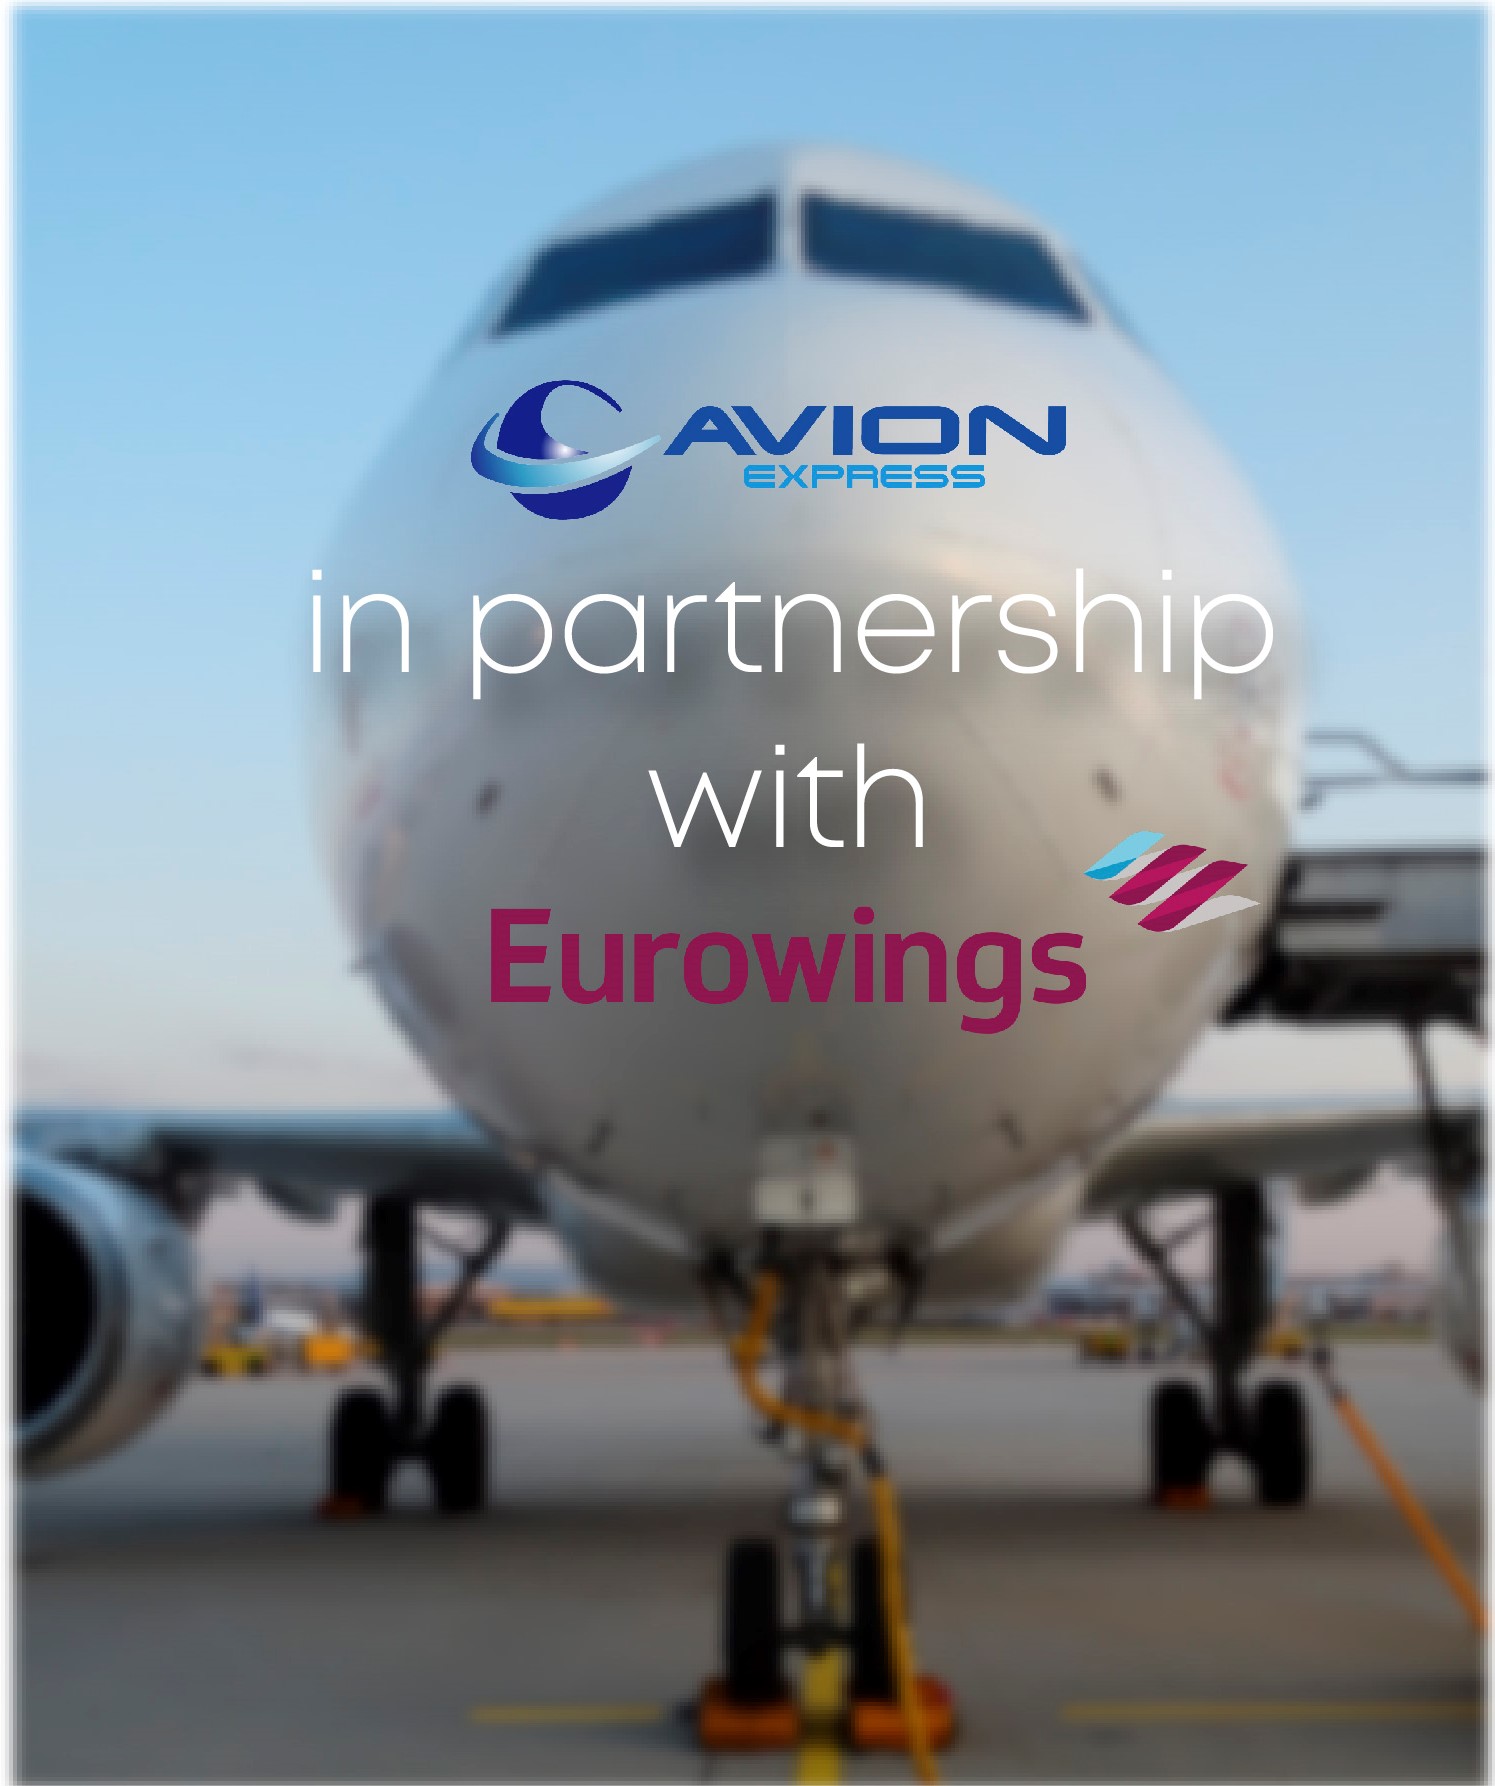 Avion Express in partnership with Eurowings